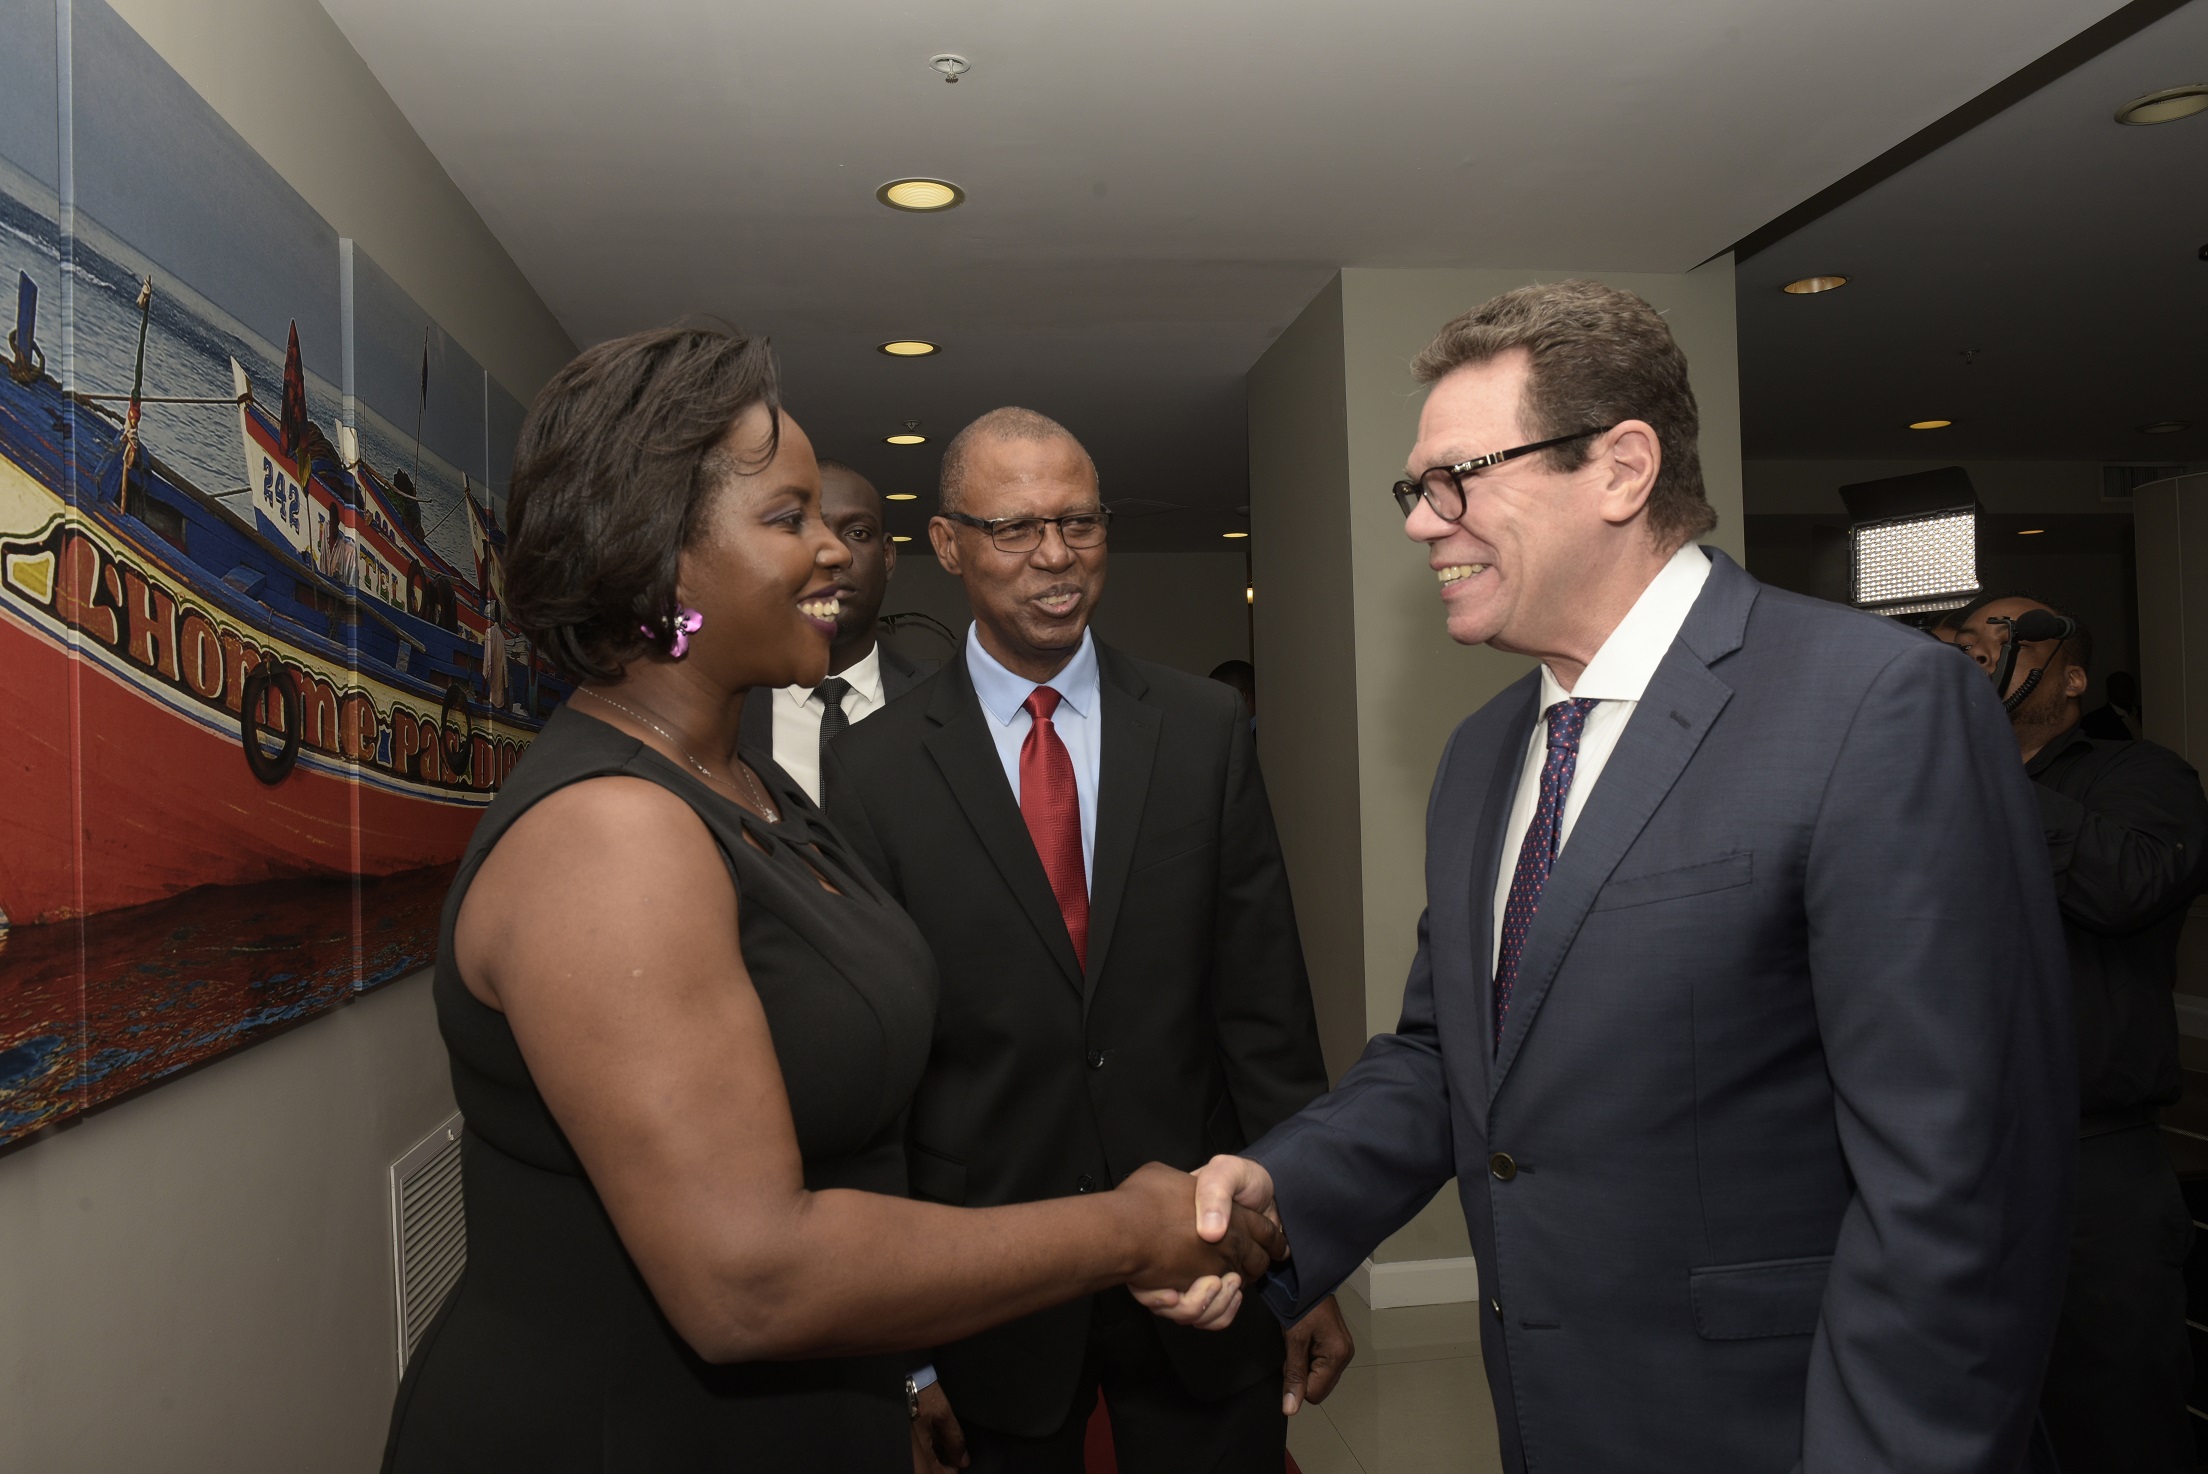 Left to right: First Lady of the Republic of Haiti, Her Excellency Martine Moïse; CDB Country Representative, Haiti, Stephen Lawrence; and CDB President, Dr. William Warren Smith exchange greetings at the inauguration event for the Bank’s new Country Office on September 21, 2018.